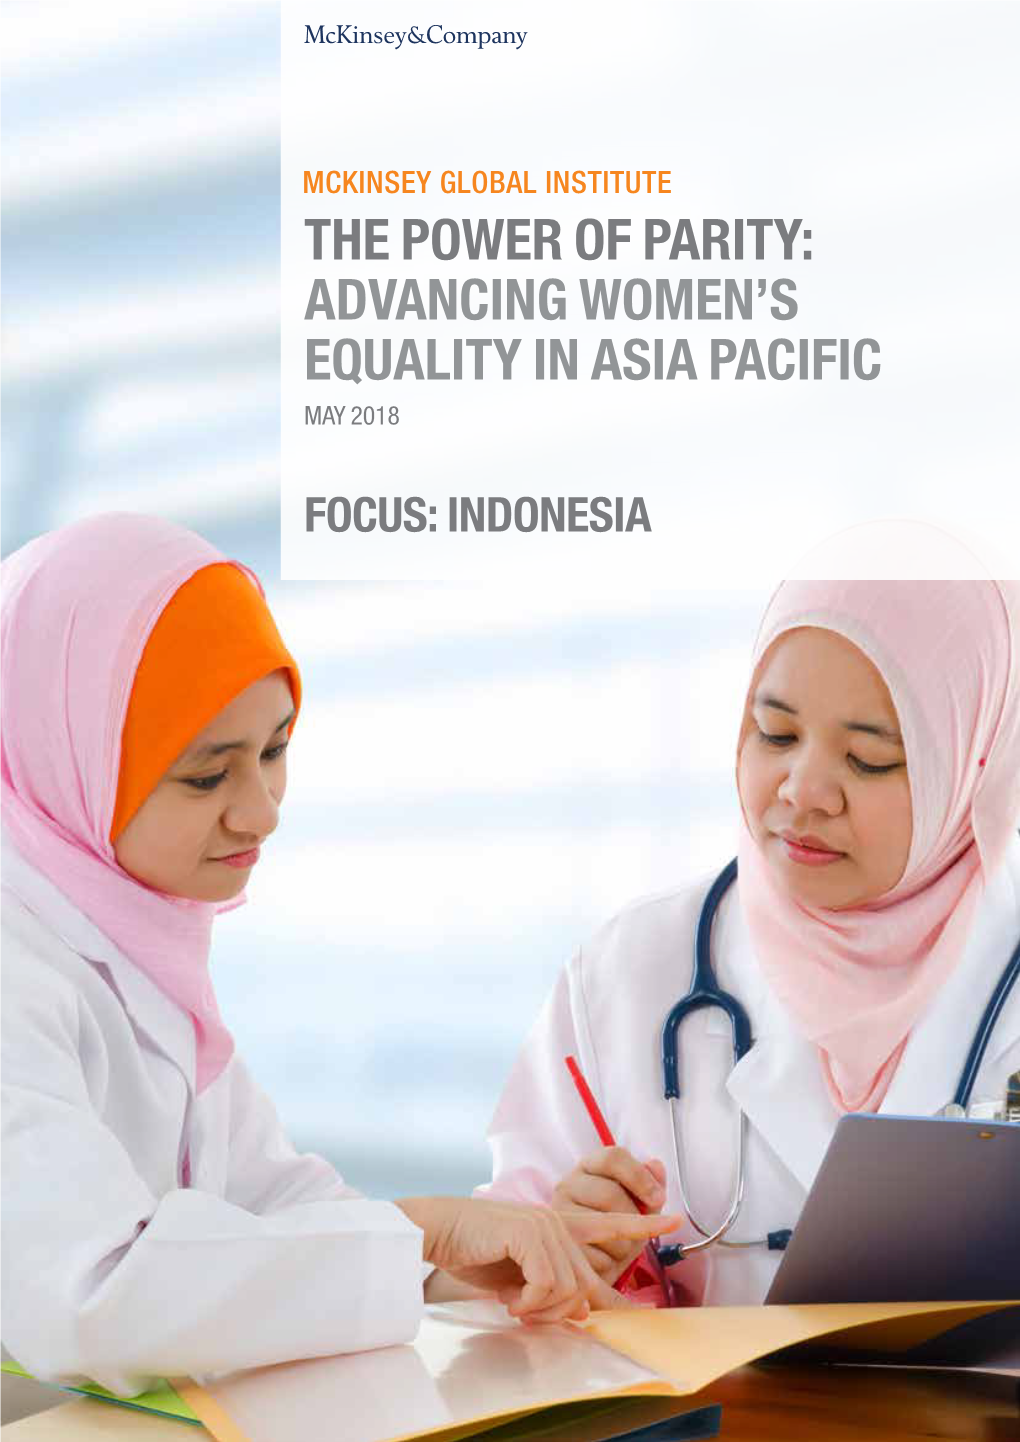 Advancing Women's Equality in Asia Pacific